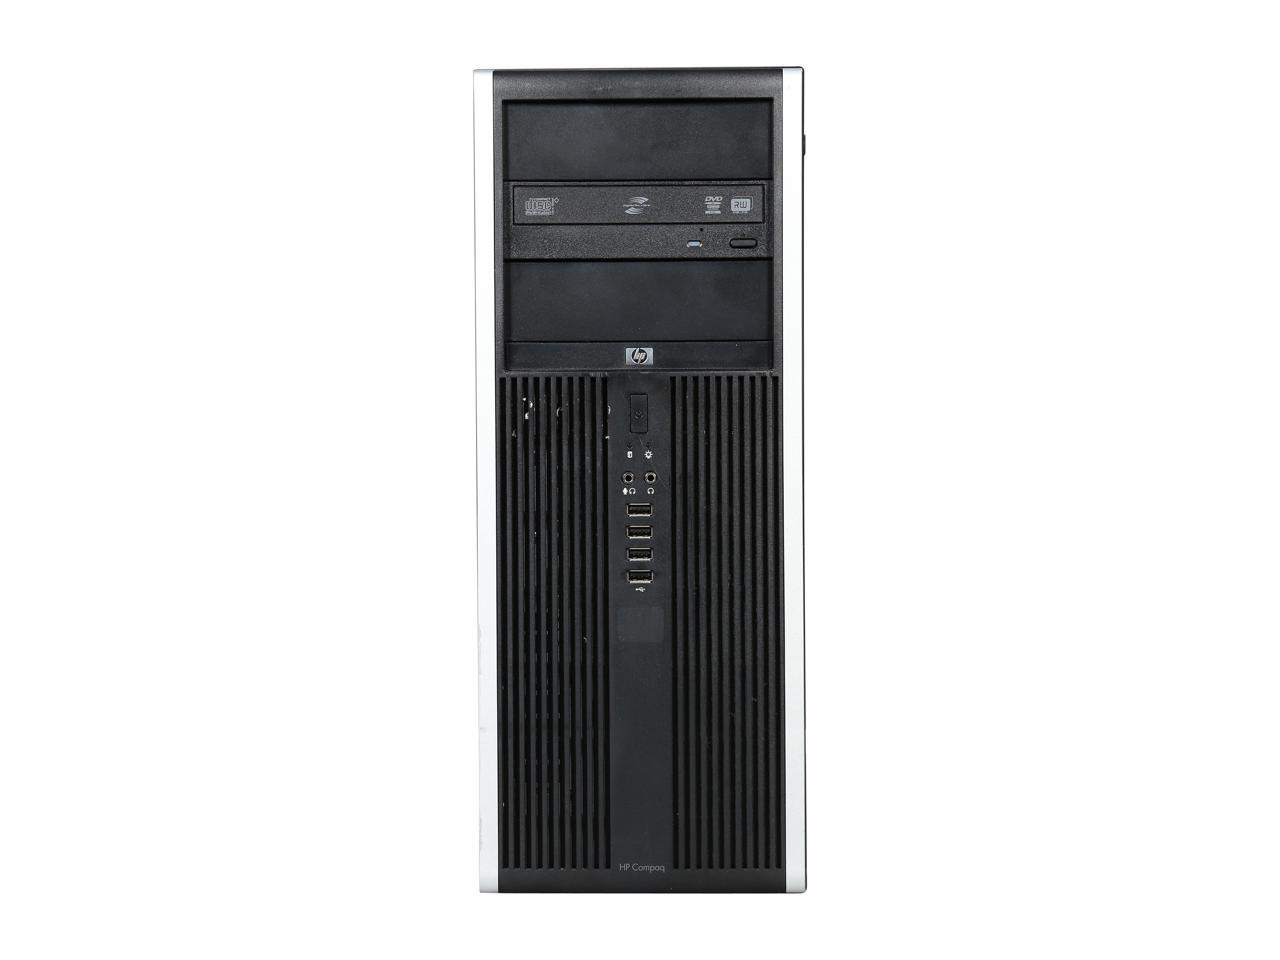 Refurbished Hp Elite 8100 Tower Desktop Pc With Quad Core Intel Core I7 860 280ghz 346ghz 5198